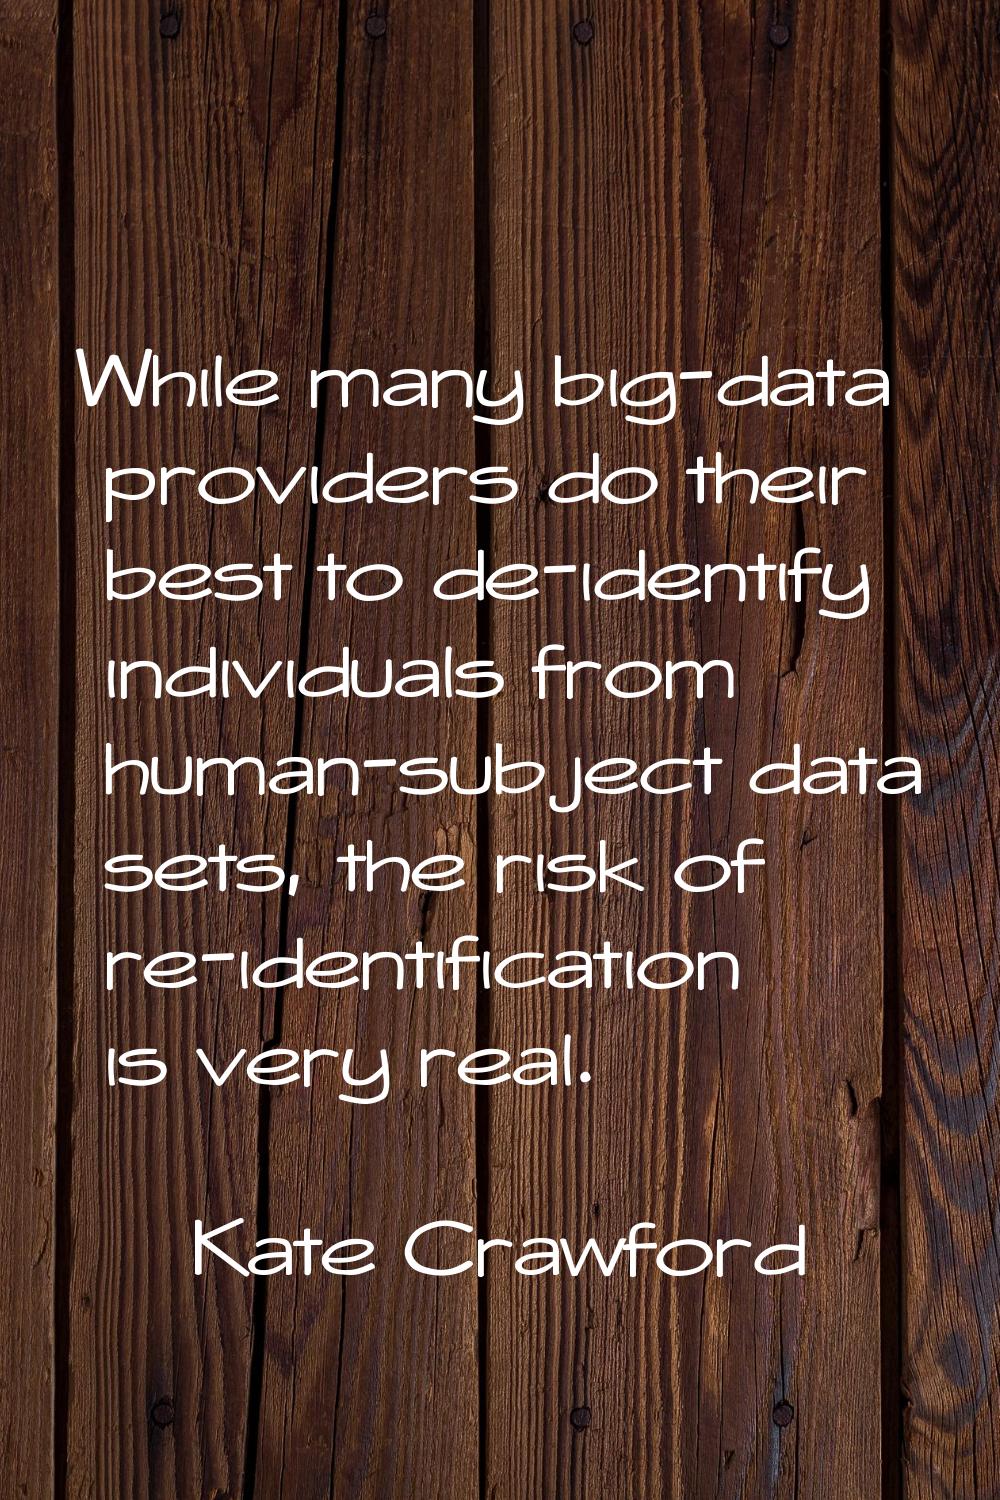 While many big-data providers do their best to de-identify individuals from human-subject data sets